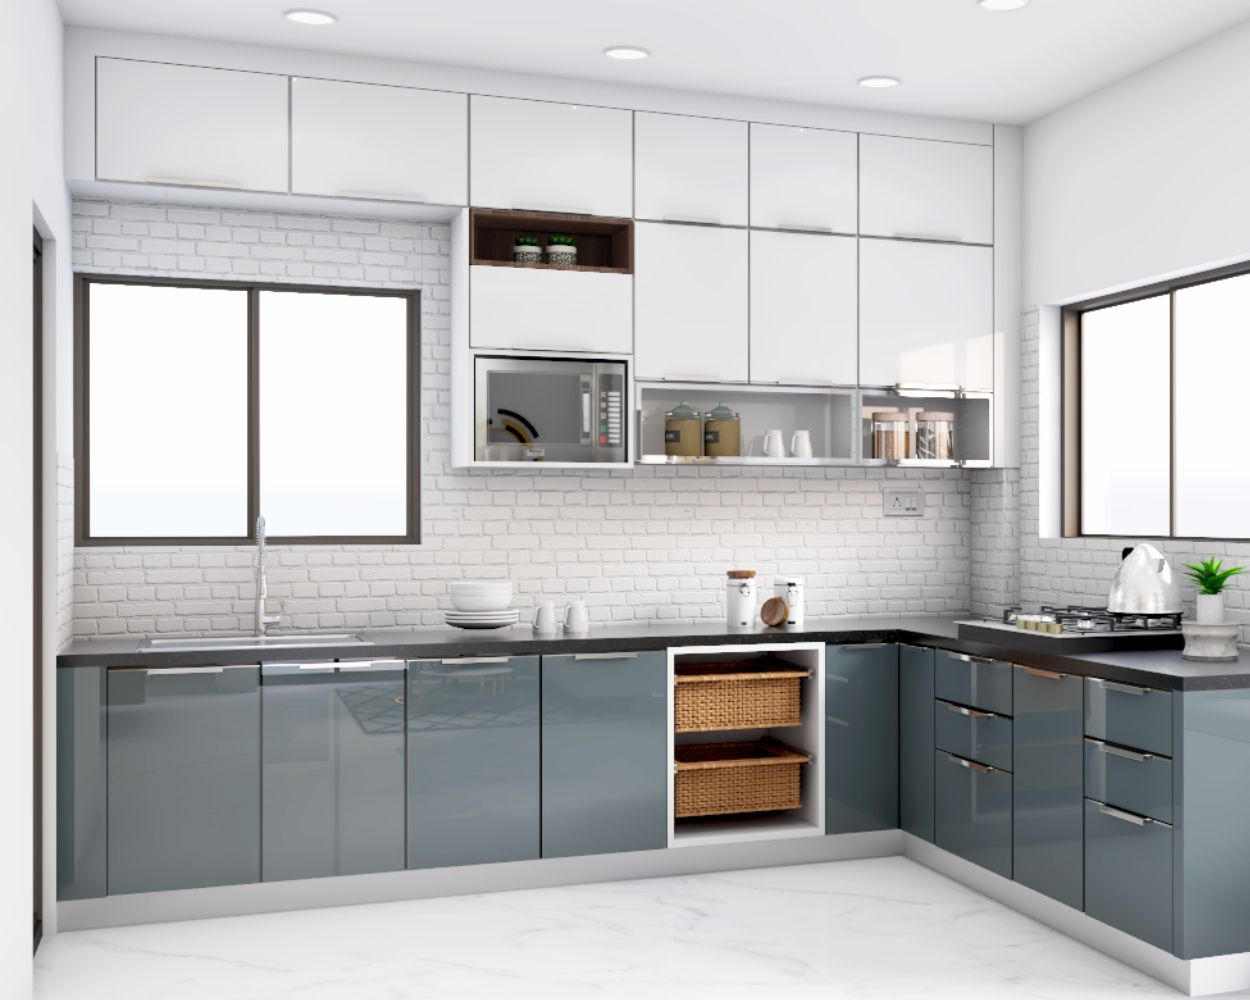 Contemporary L-Shaped Modular Kitchen Design With Silver Frost And Frosty White Accents